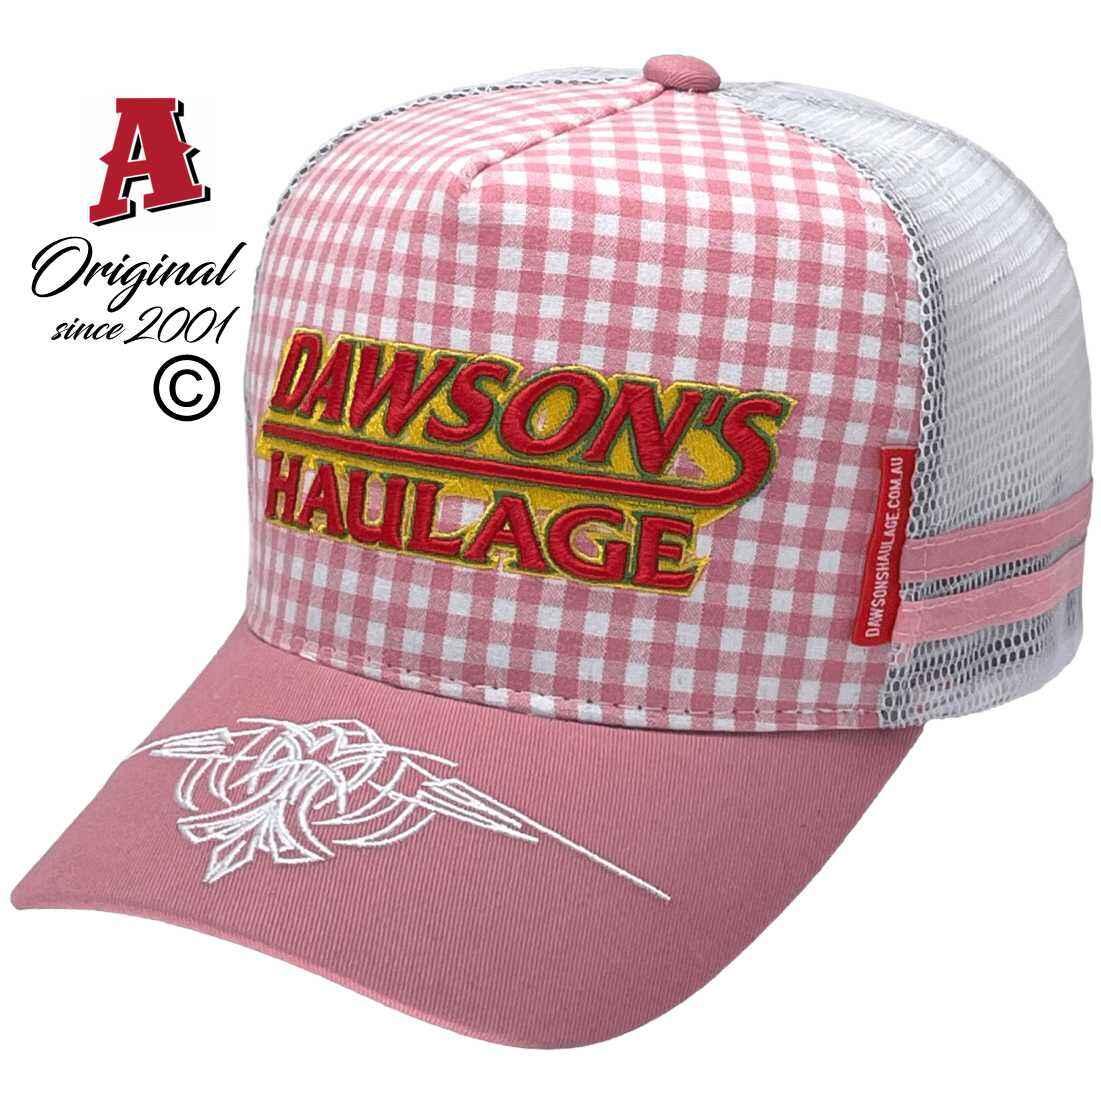 Dawsons Haulage BARANDUDA VIC HP Power Aussie Trucker Hats with Double Side Bands and Australian HeadFit Crown Pink Gingham White